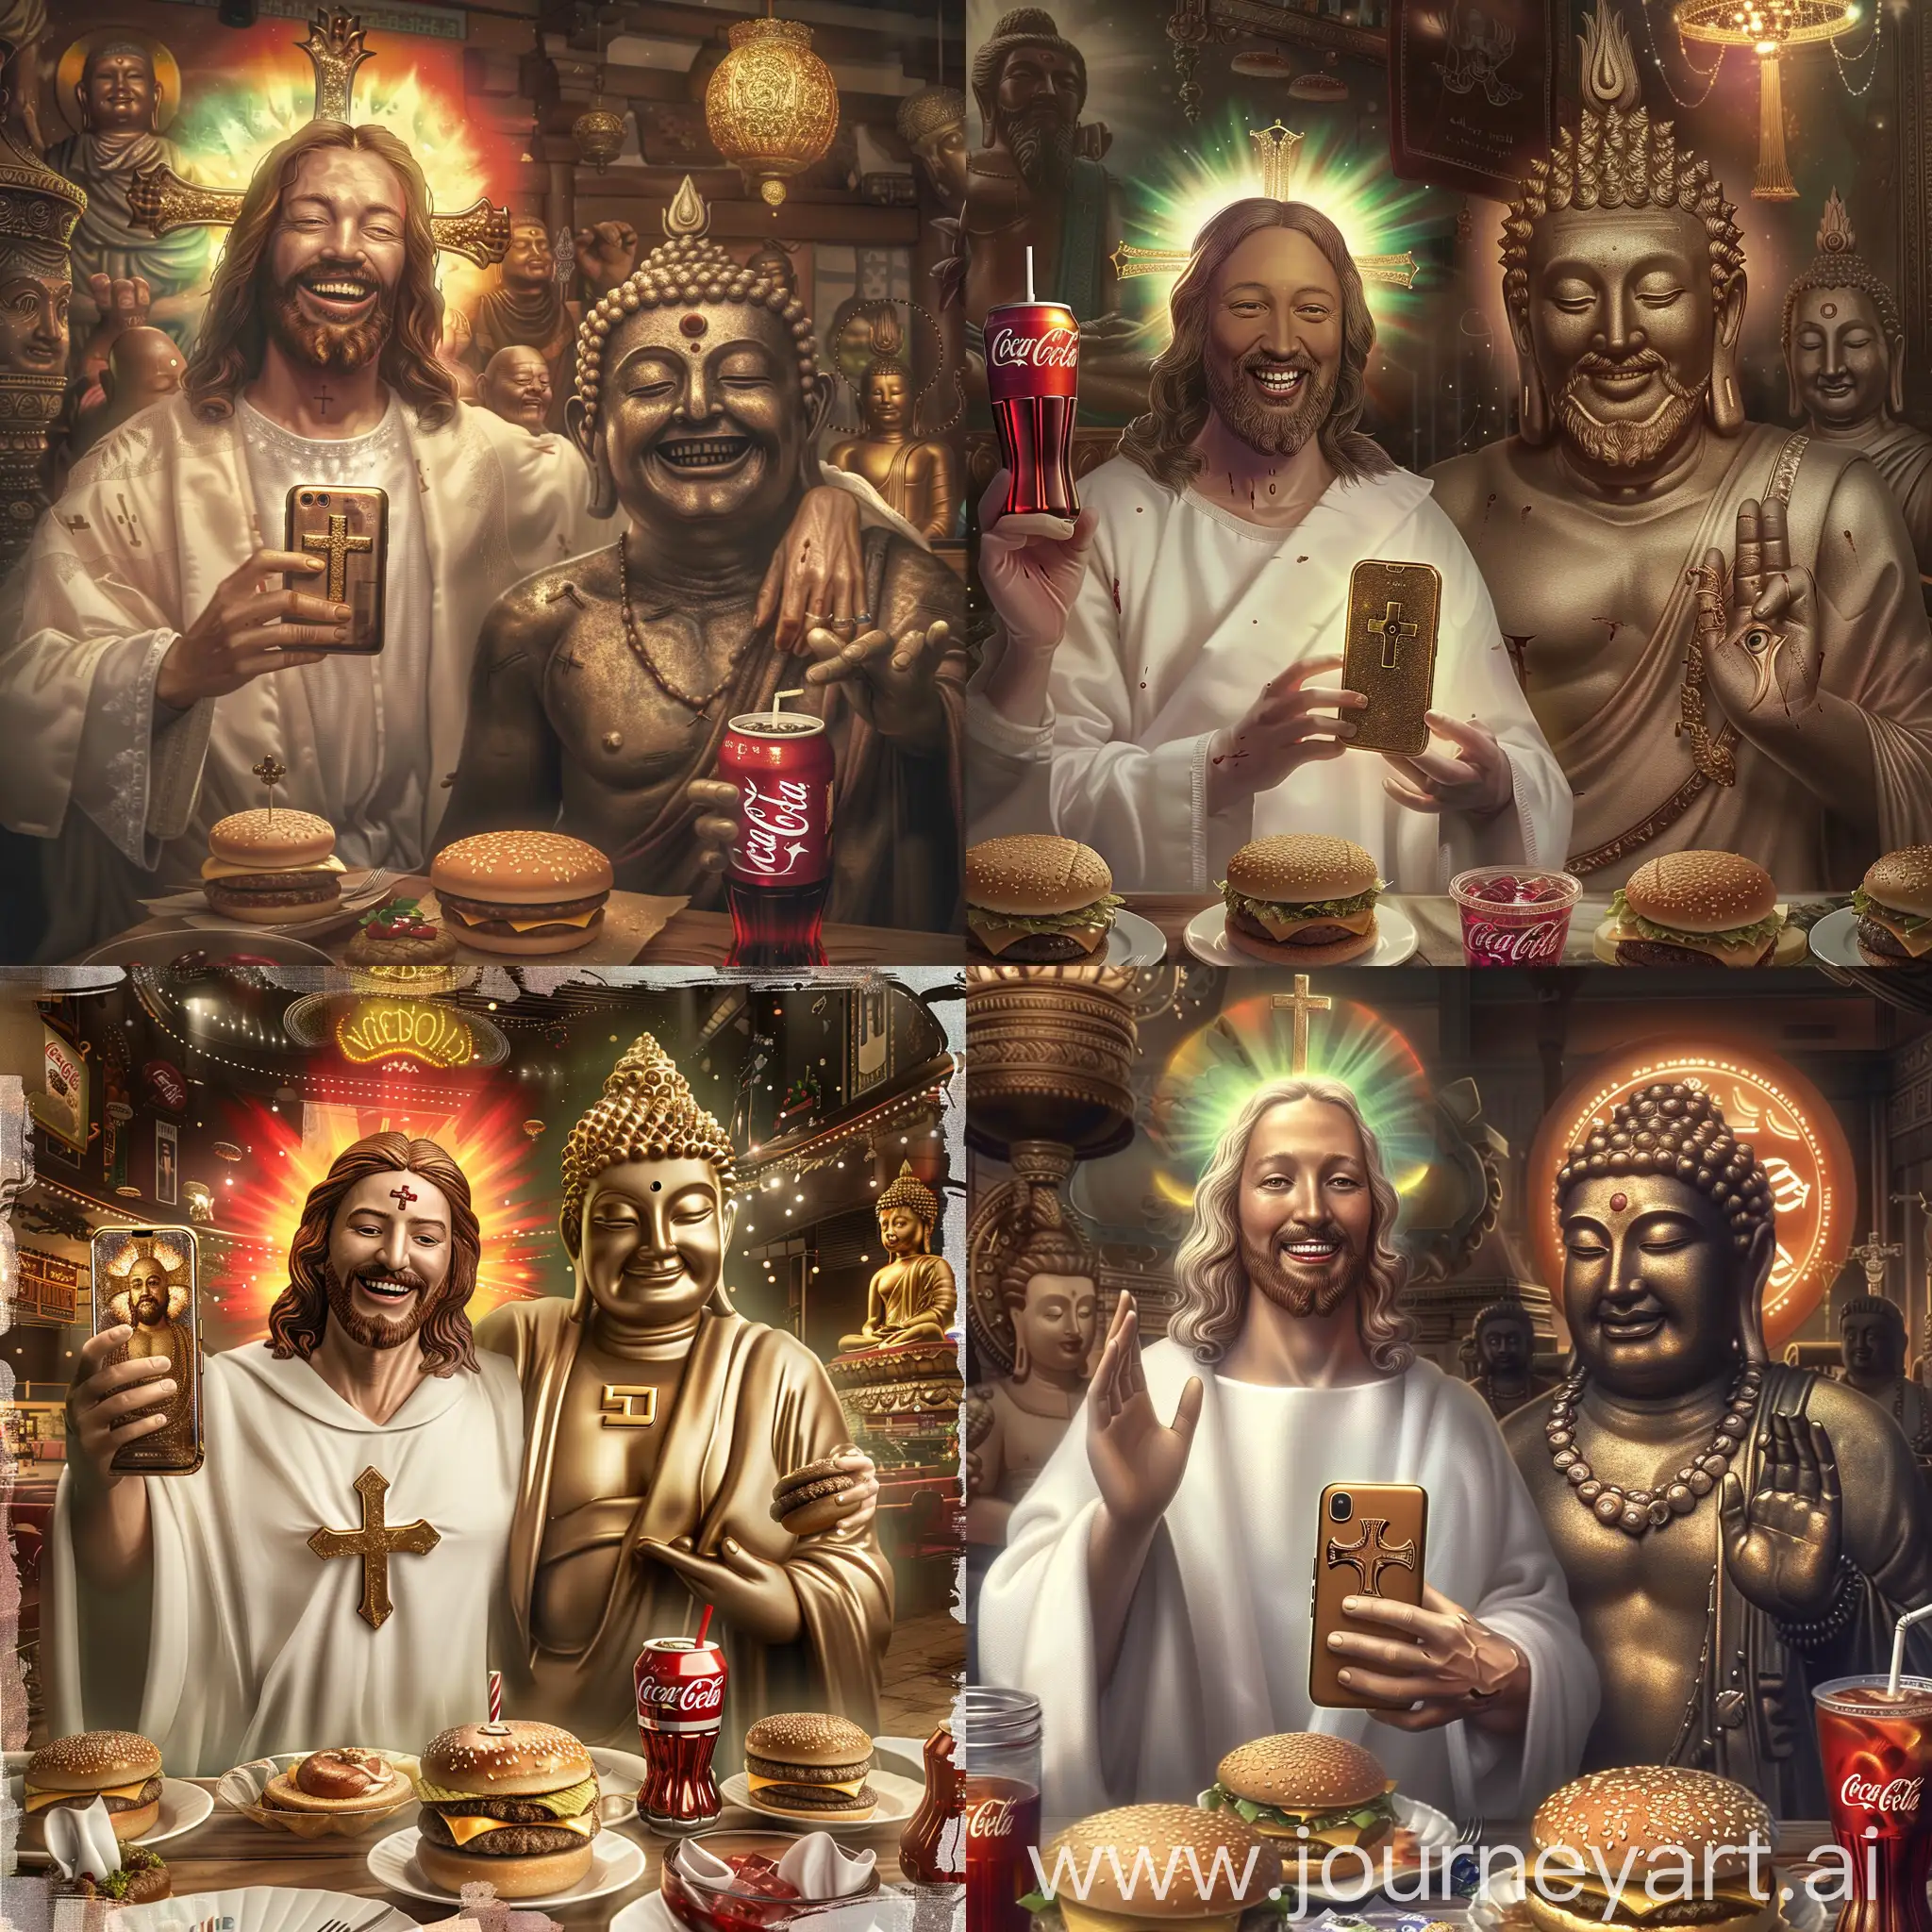 real historic photo mode:

a smiling and elegant Jesus in white robe, he holds a bronze smartphone with a Christian cross on it,

Jesus has aurora behind his head,

next to Jesus, there is an elegant and smiling Indian Buddha with aurora behind his hand,

they are inside a holy fast food restaurant, hamburgers and Coca-Cola are on their dinner table,